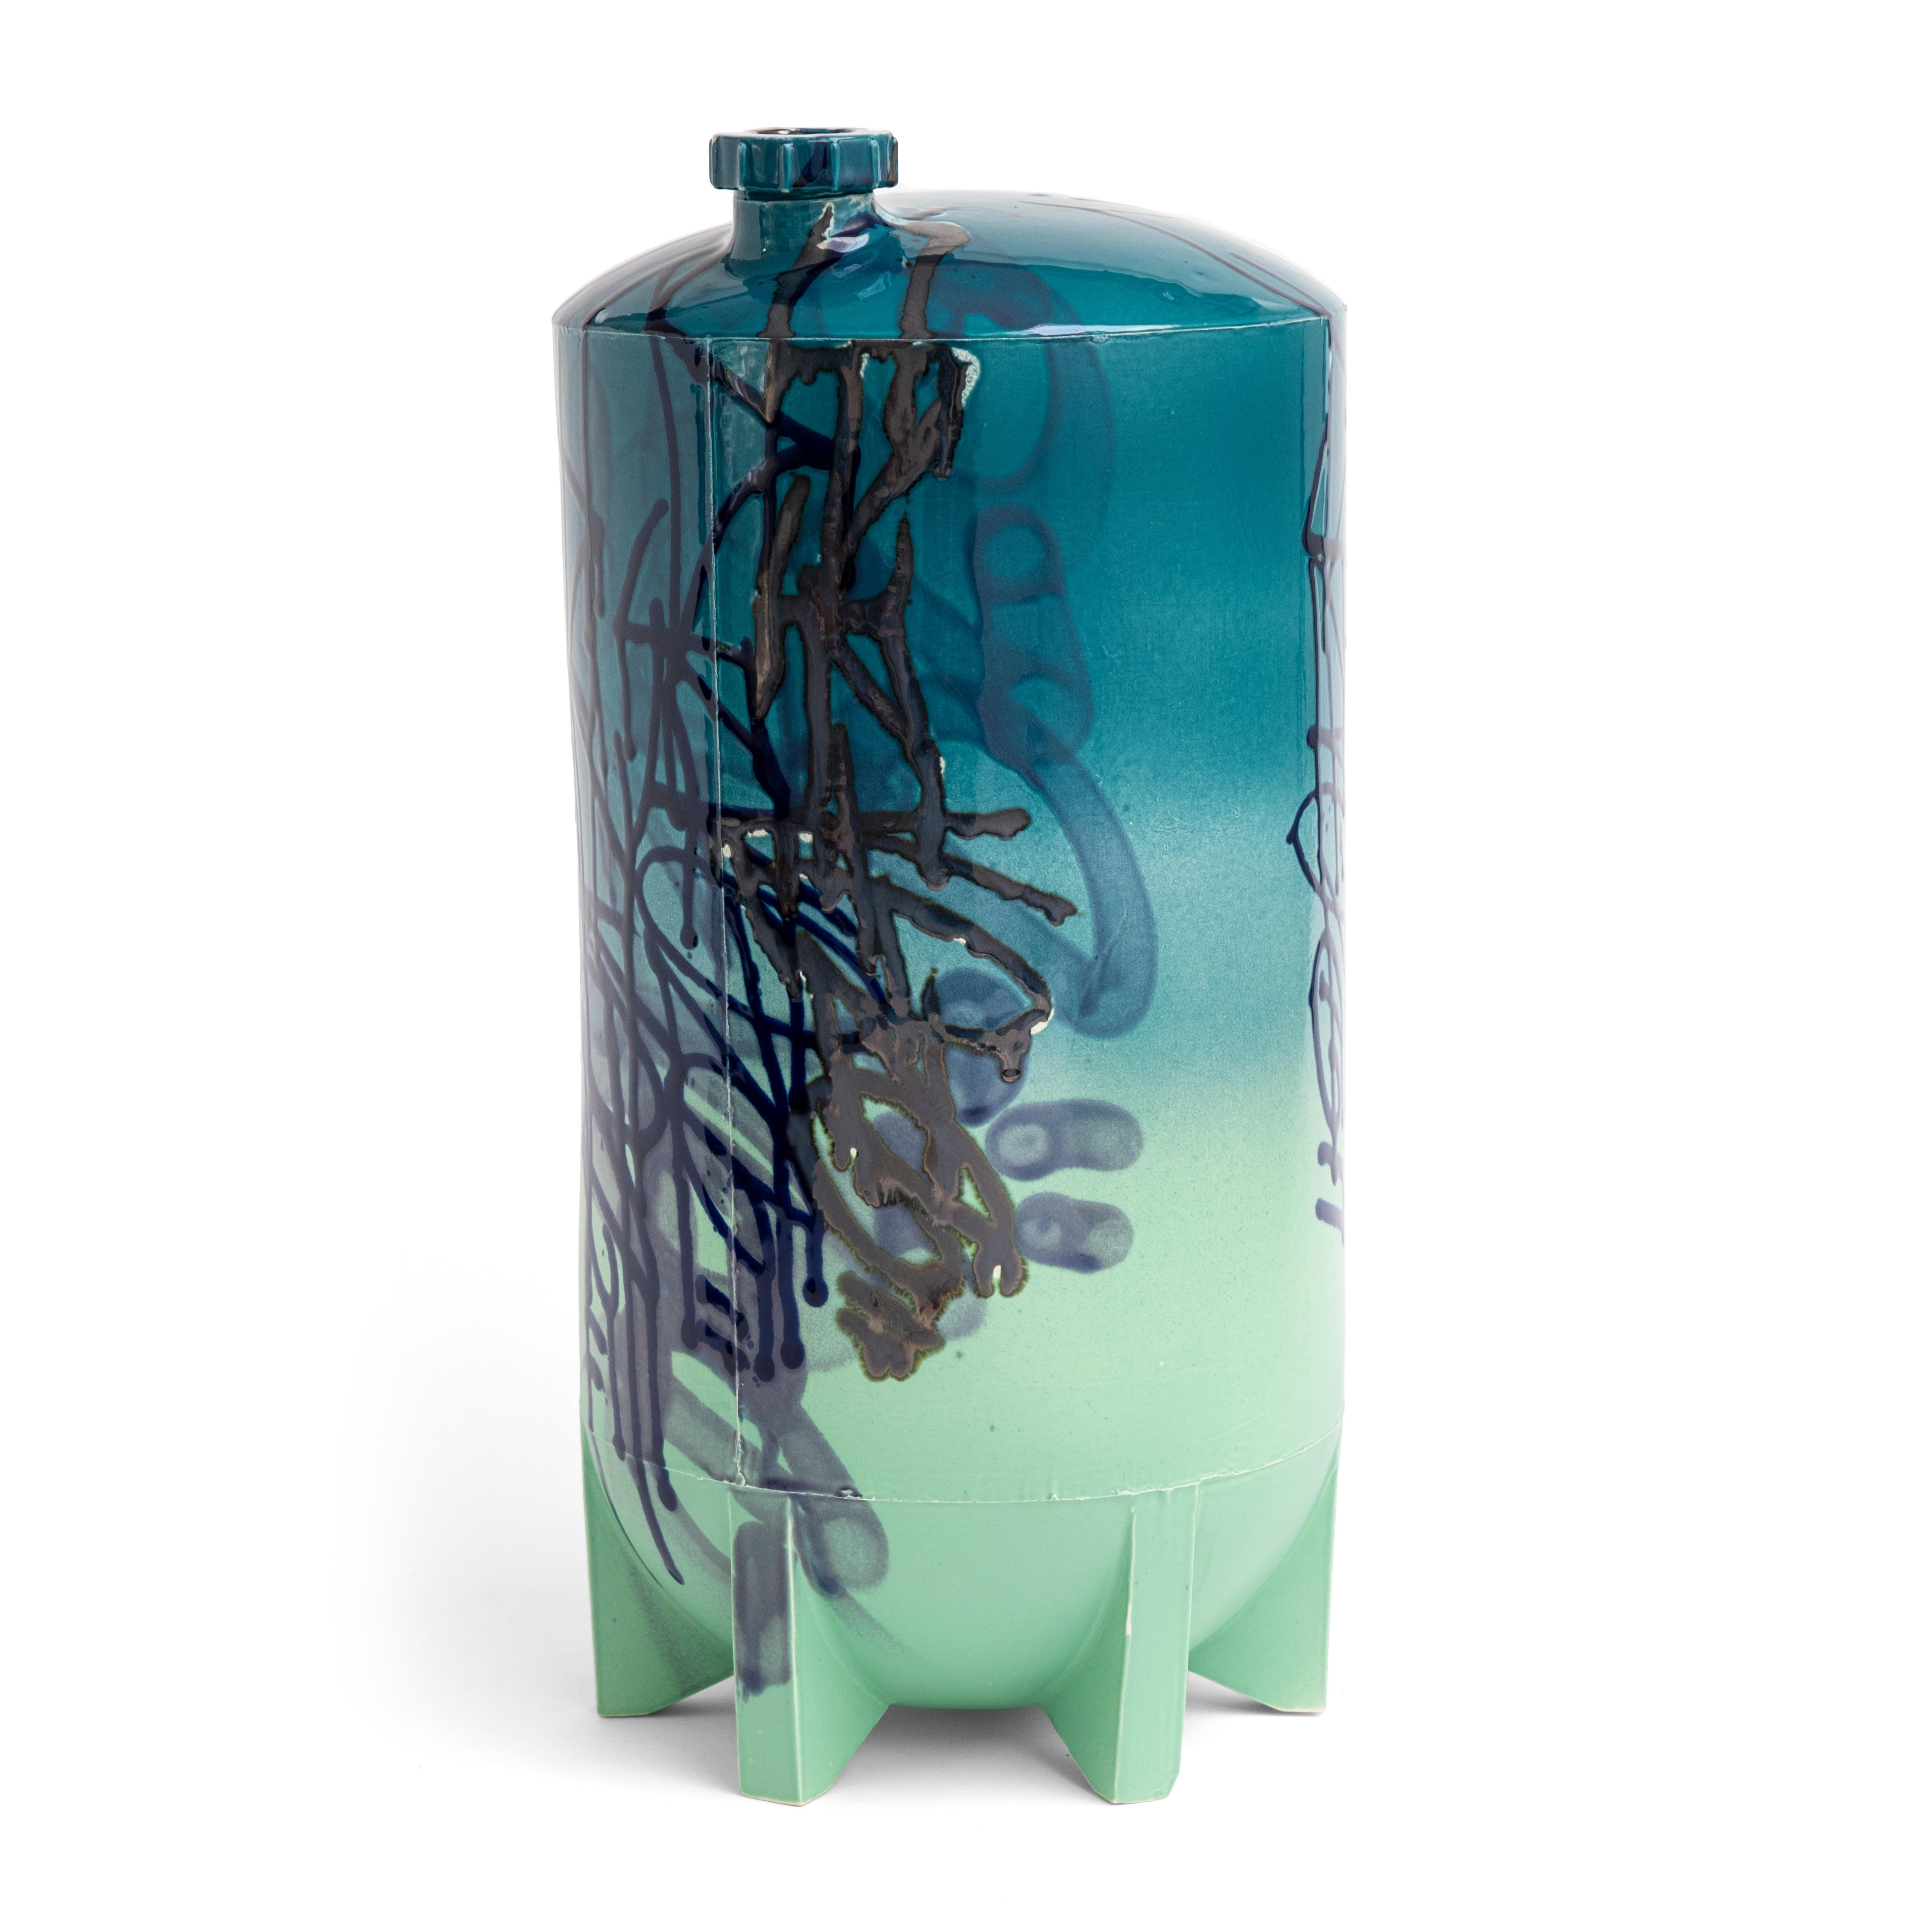 Under pressure 10 by Yuri van Poppel
Dimensions: D 27 x H 55 cm
One of a kind.
Earthenware, layered ceramic glazes, various colours.
Handmade and spray-painted by hand by SunkOne. Removable lid.

Everlasting graffiti spray-painted with ceramic